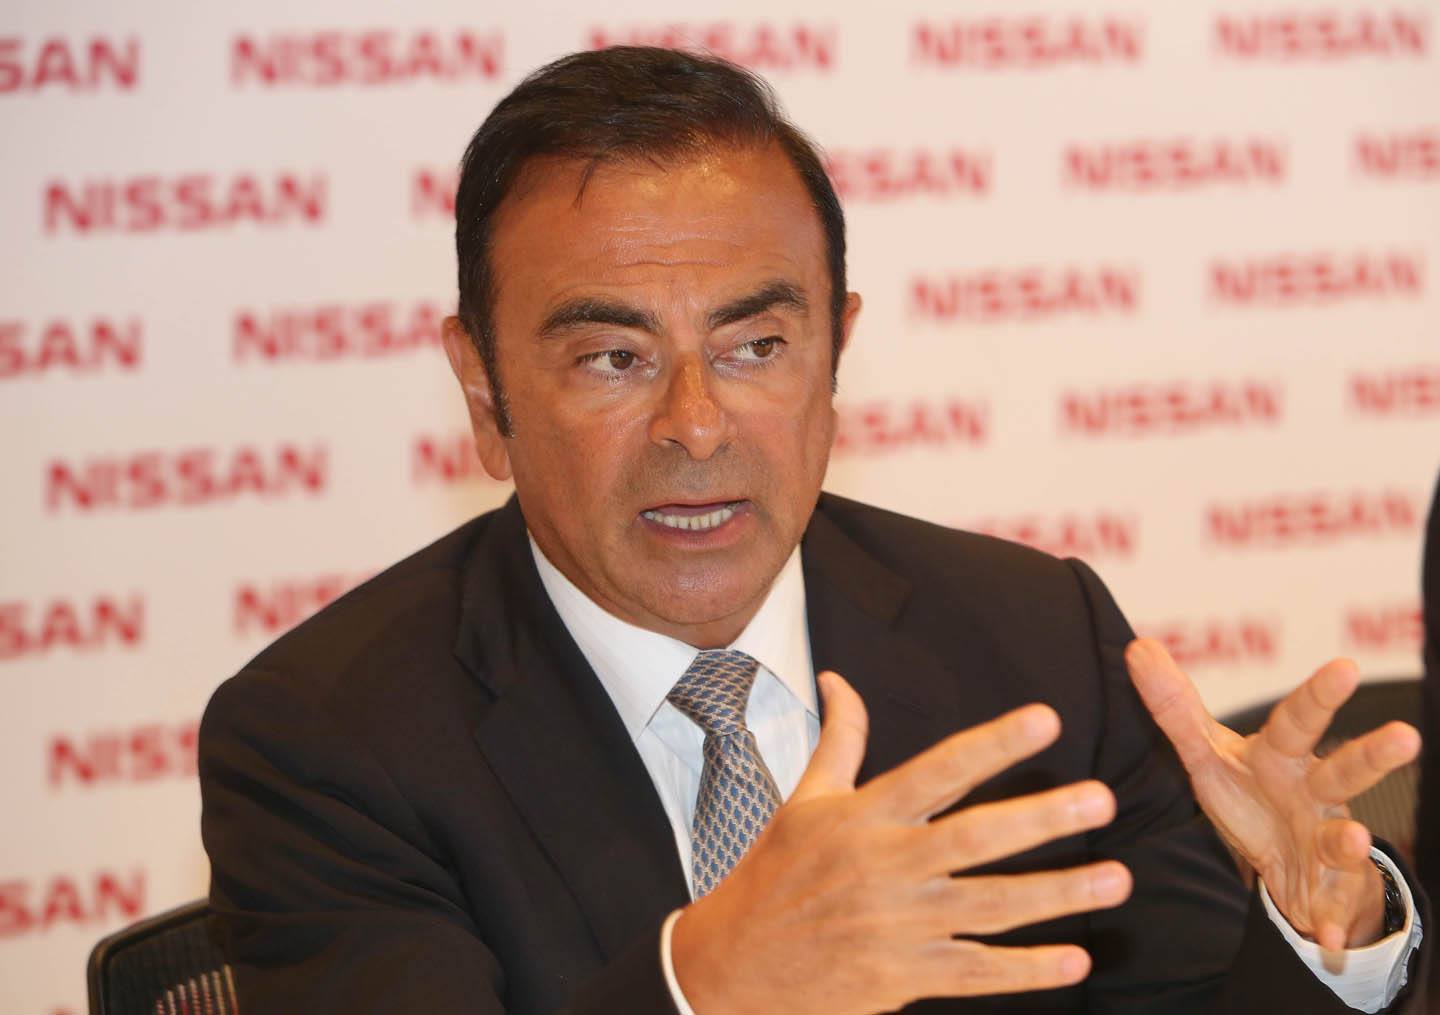 Nissan to pursue legal action against former CEO Carlos Ghosn